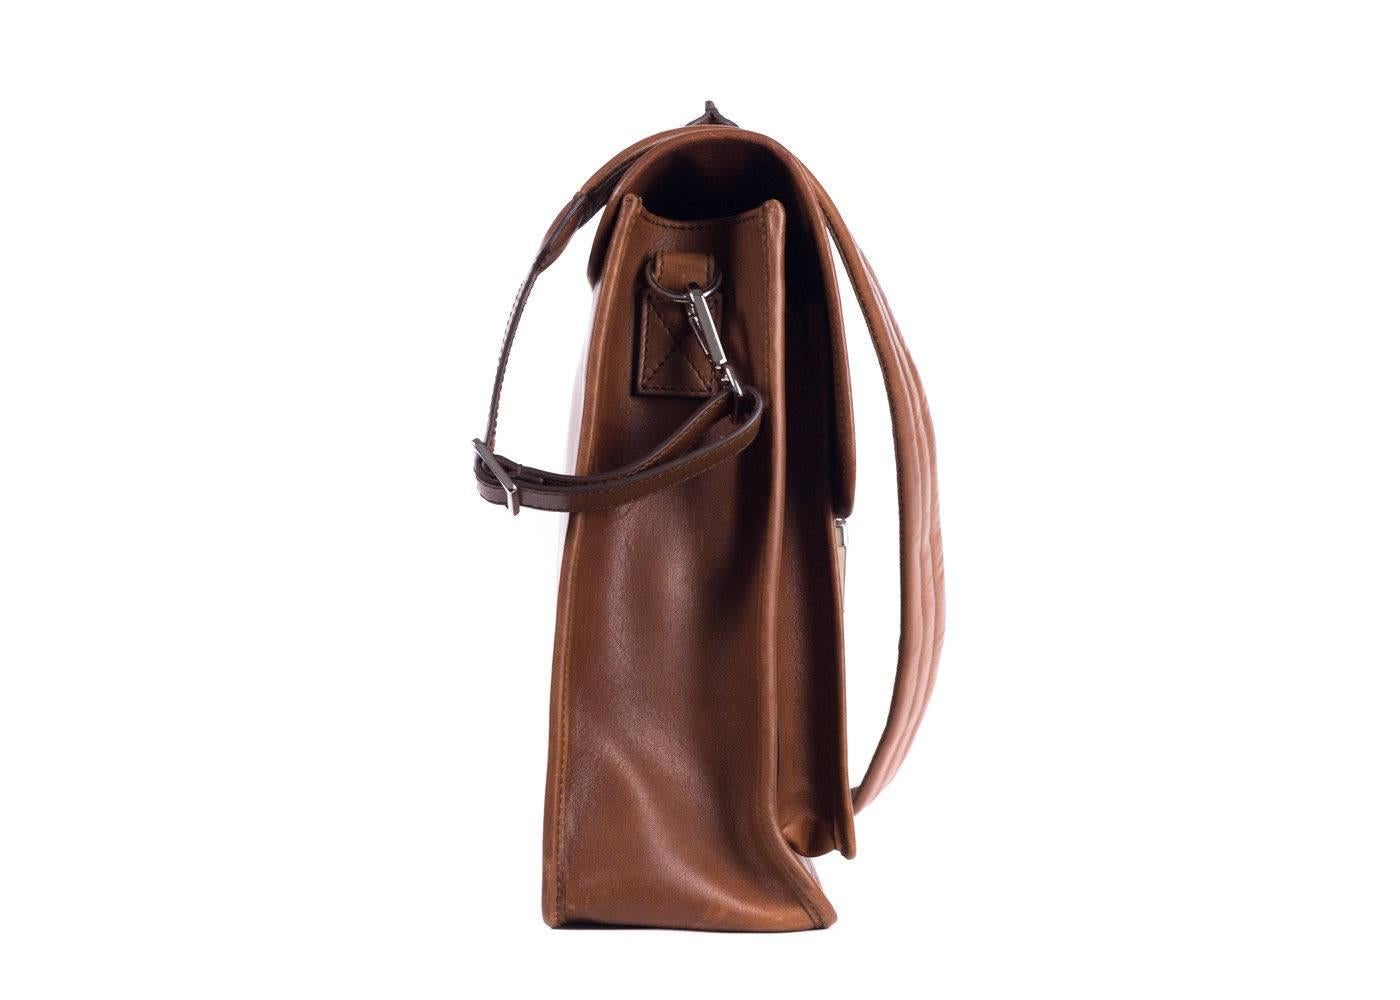 Brand New Brunello Cucinelli Messenger
Dust Bag Included
Retails in Stores & Online for $2875
Dimensions: 18